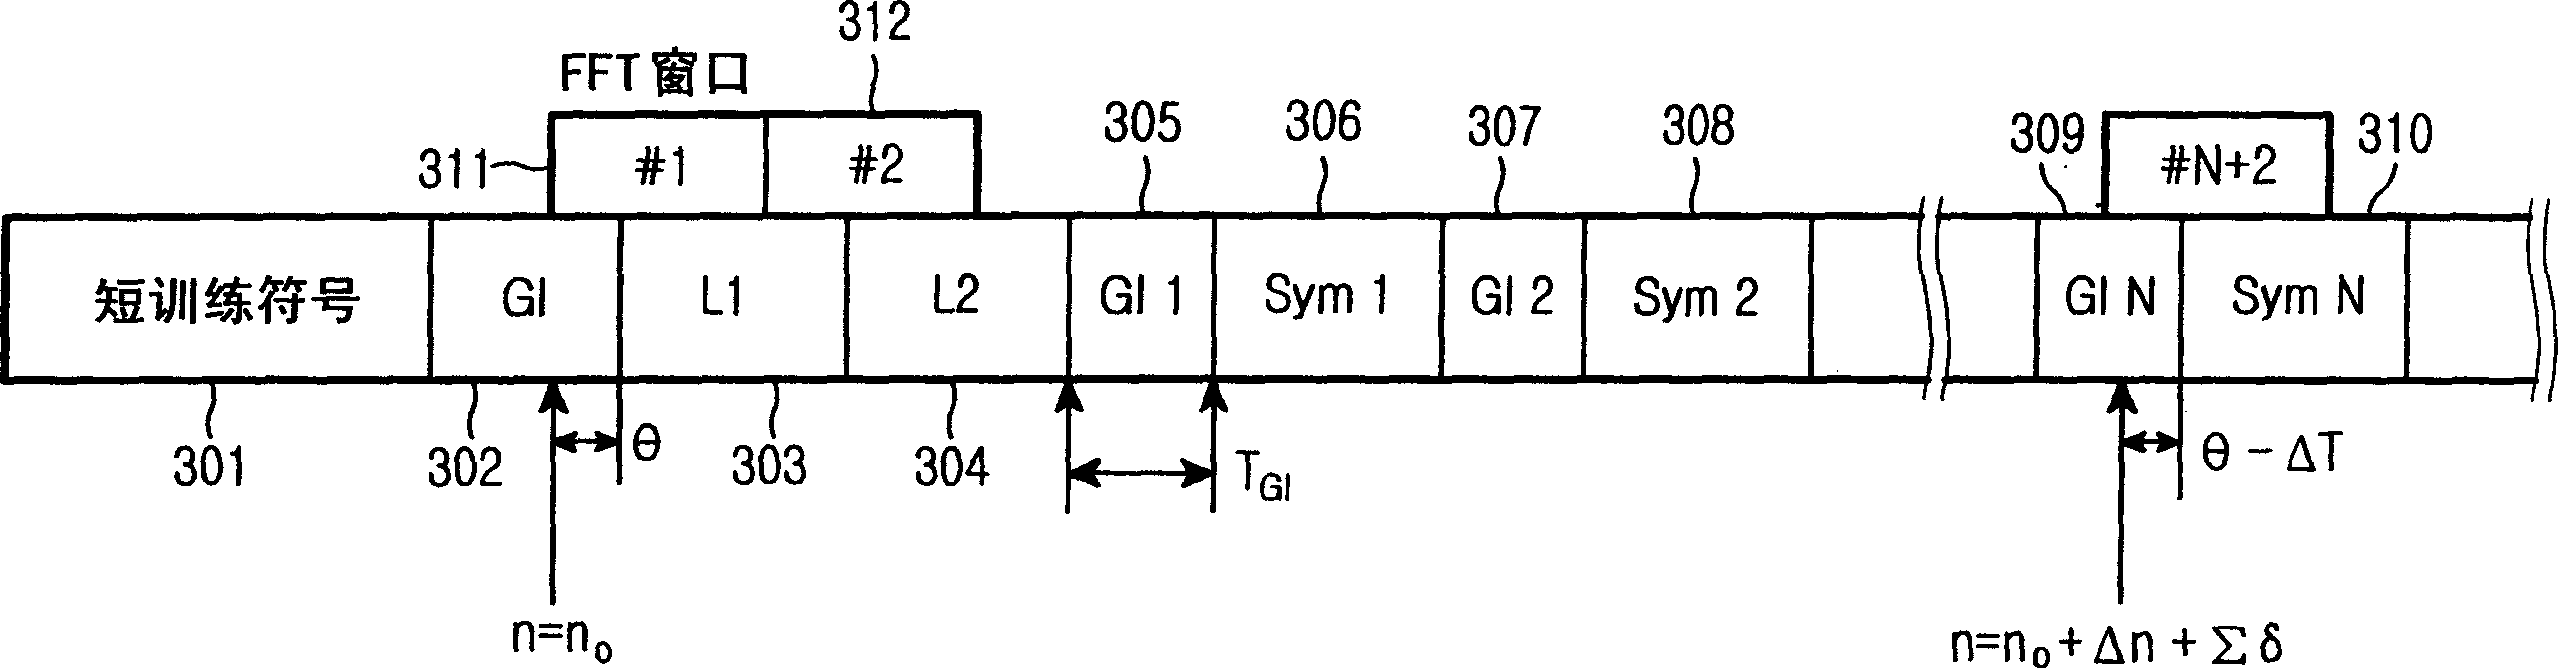 Apparatus and method for compensating for a frequency offset in a wireless communication system